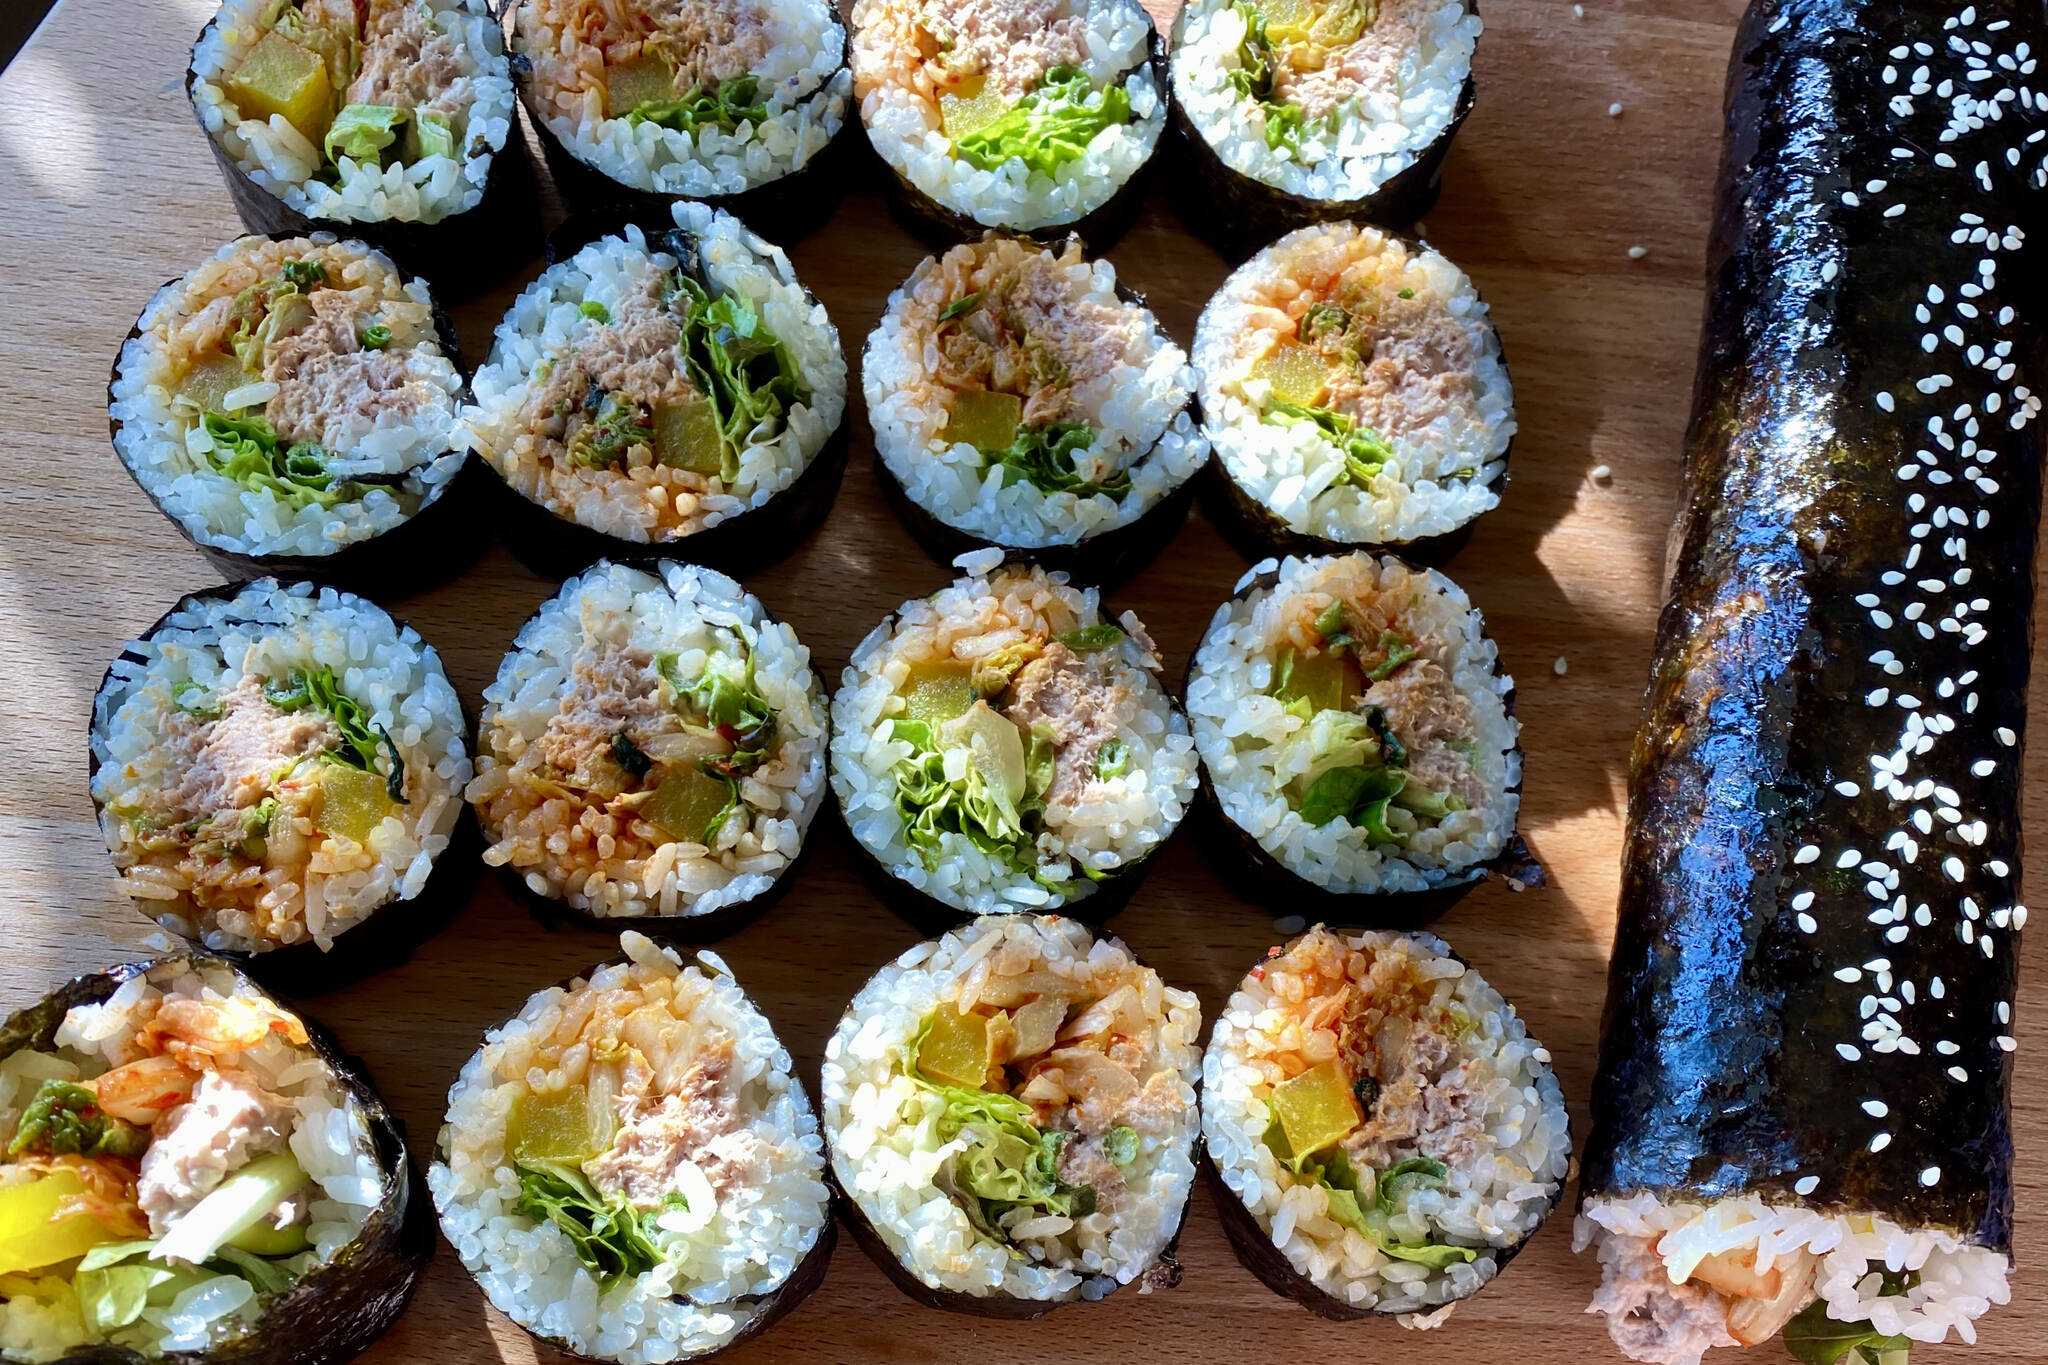 Korean kimbap with tuna, kimchi, lettuce and carrots makes a perfect to-go meal. (Photo by Tressa Dale/ Peninsula Clarion)